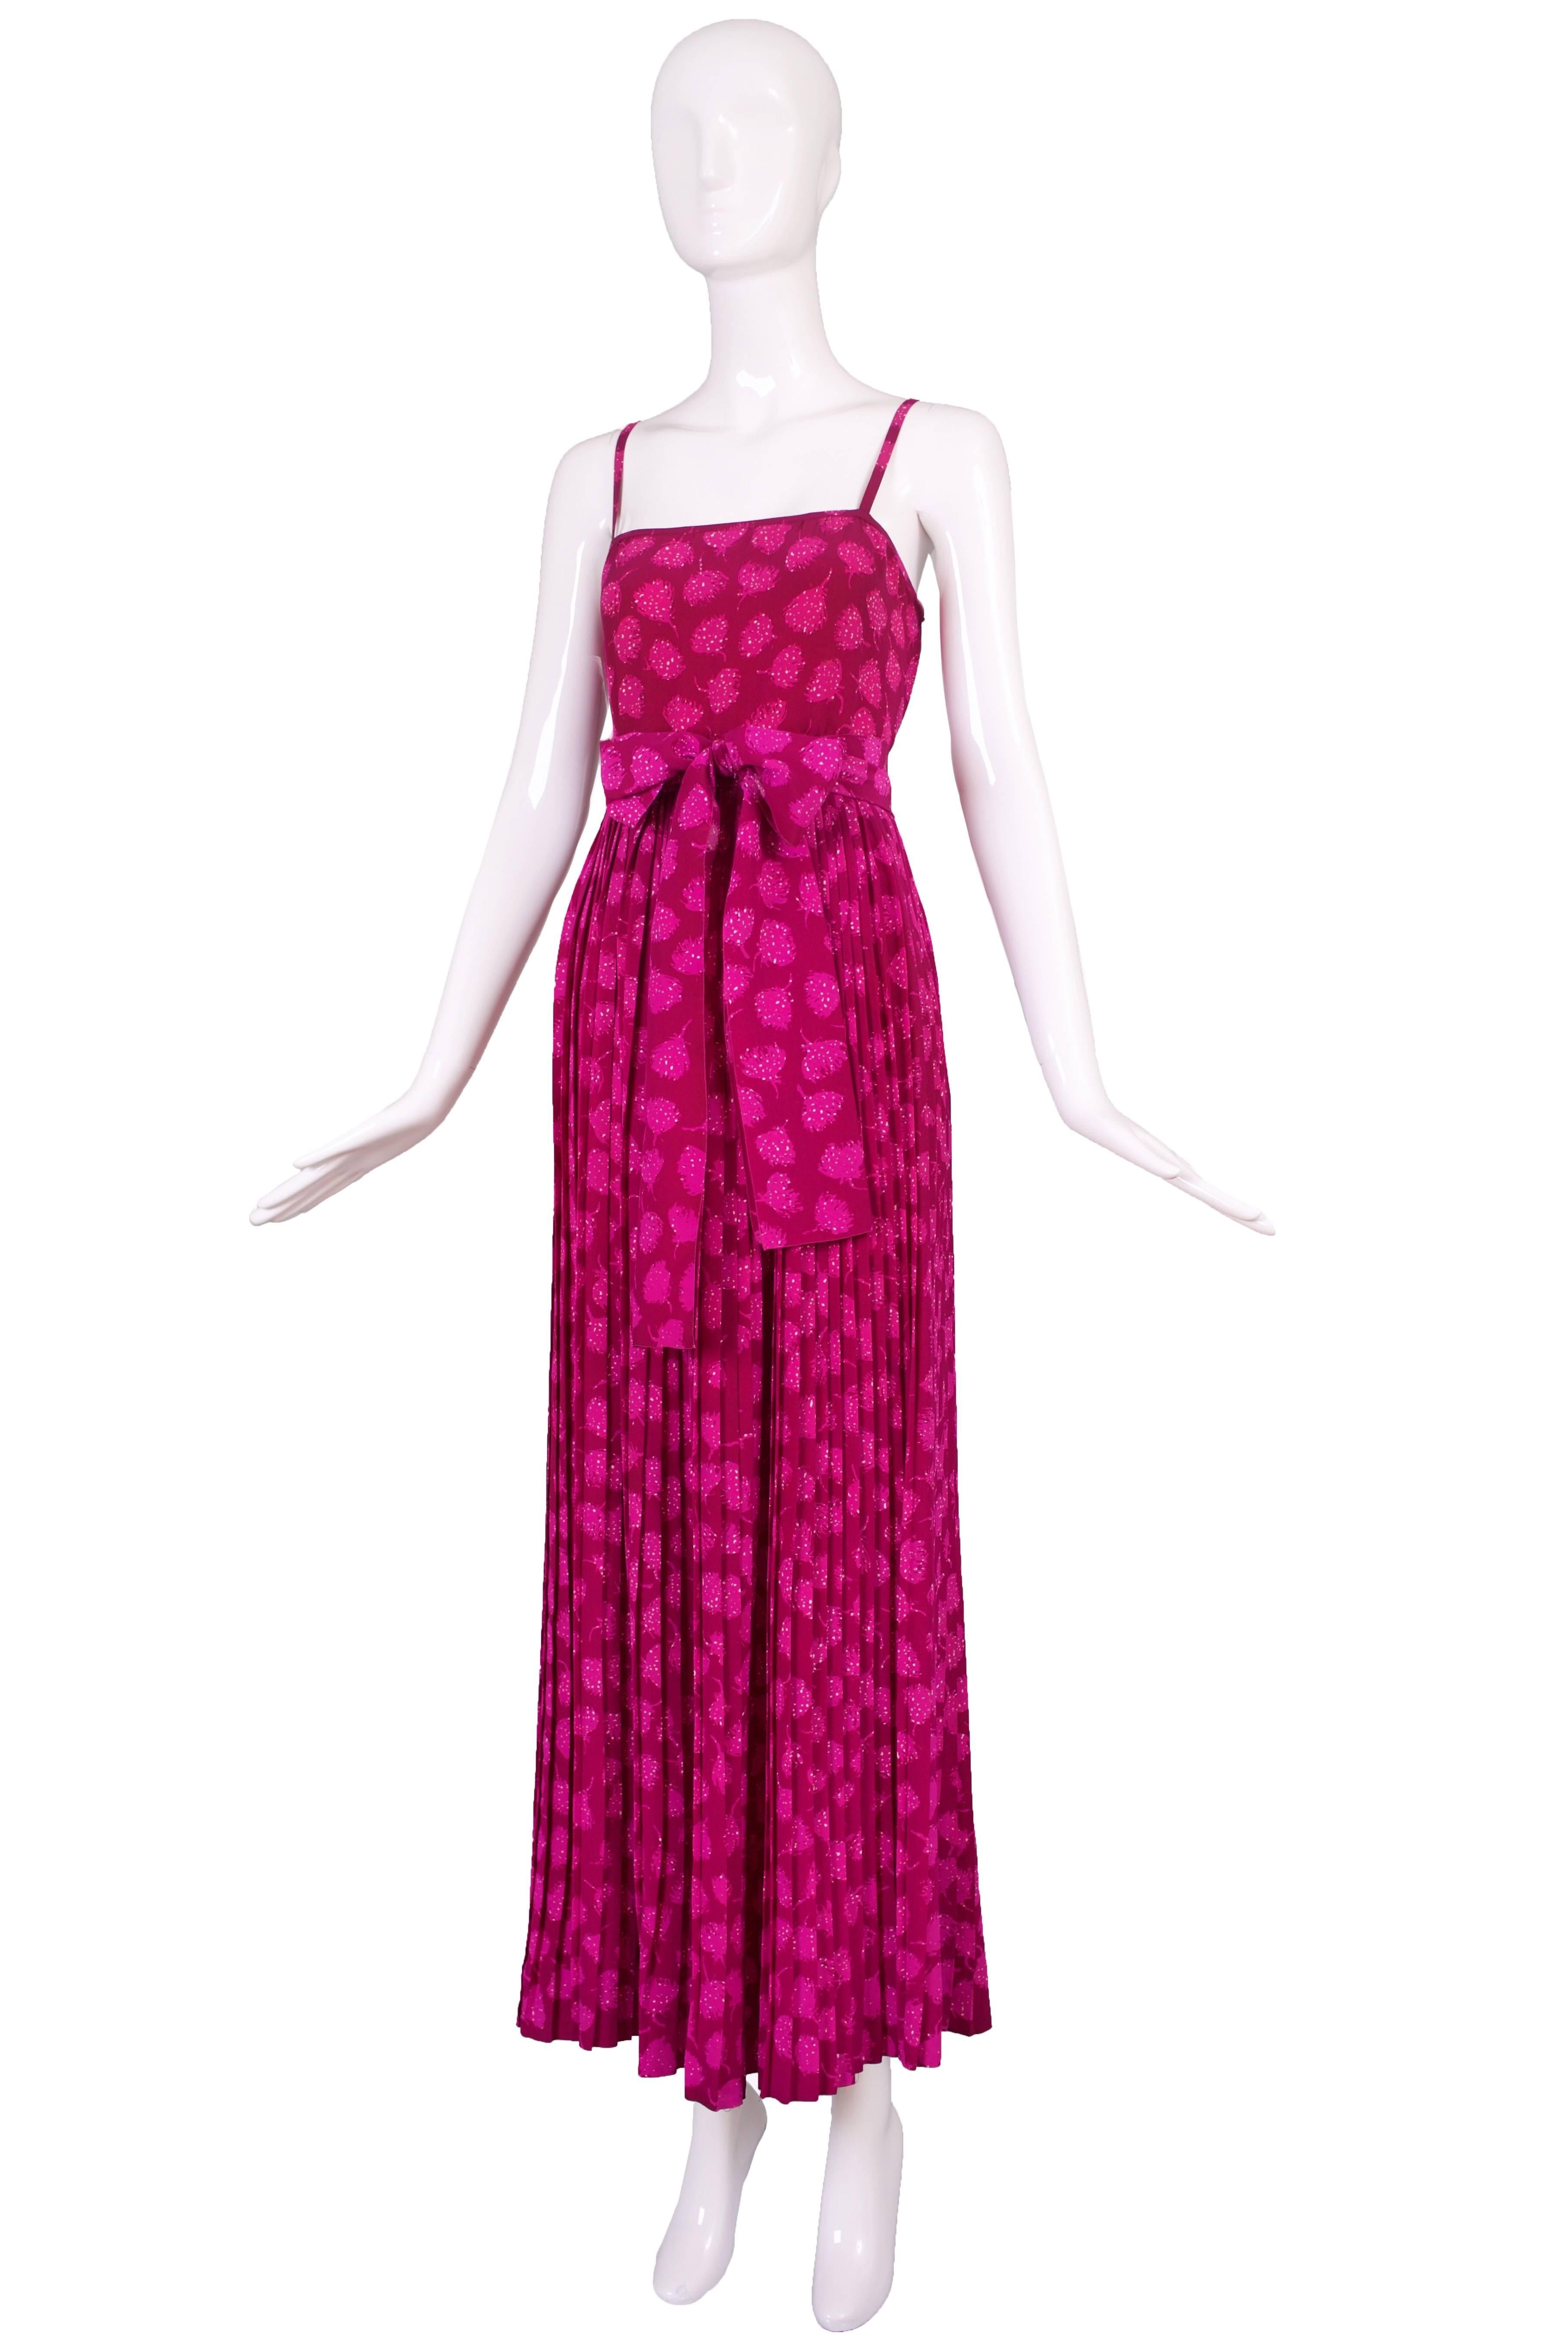 1970's Christian Dior Boutique Couture fuchsia tank and pleated skirt ensemble with self waist tie and matching blouse. In excellent condition - no size tag please consult measurements.
MEASUREMENTS:
Tank Top
Bust - approx. 36